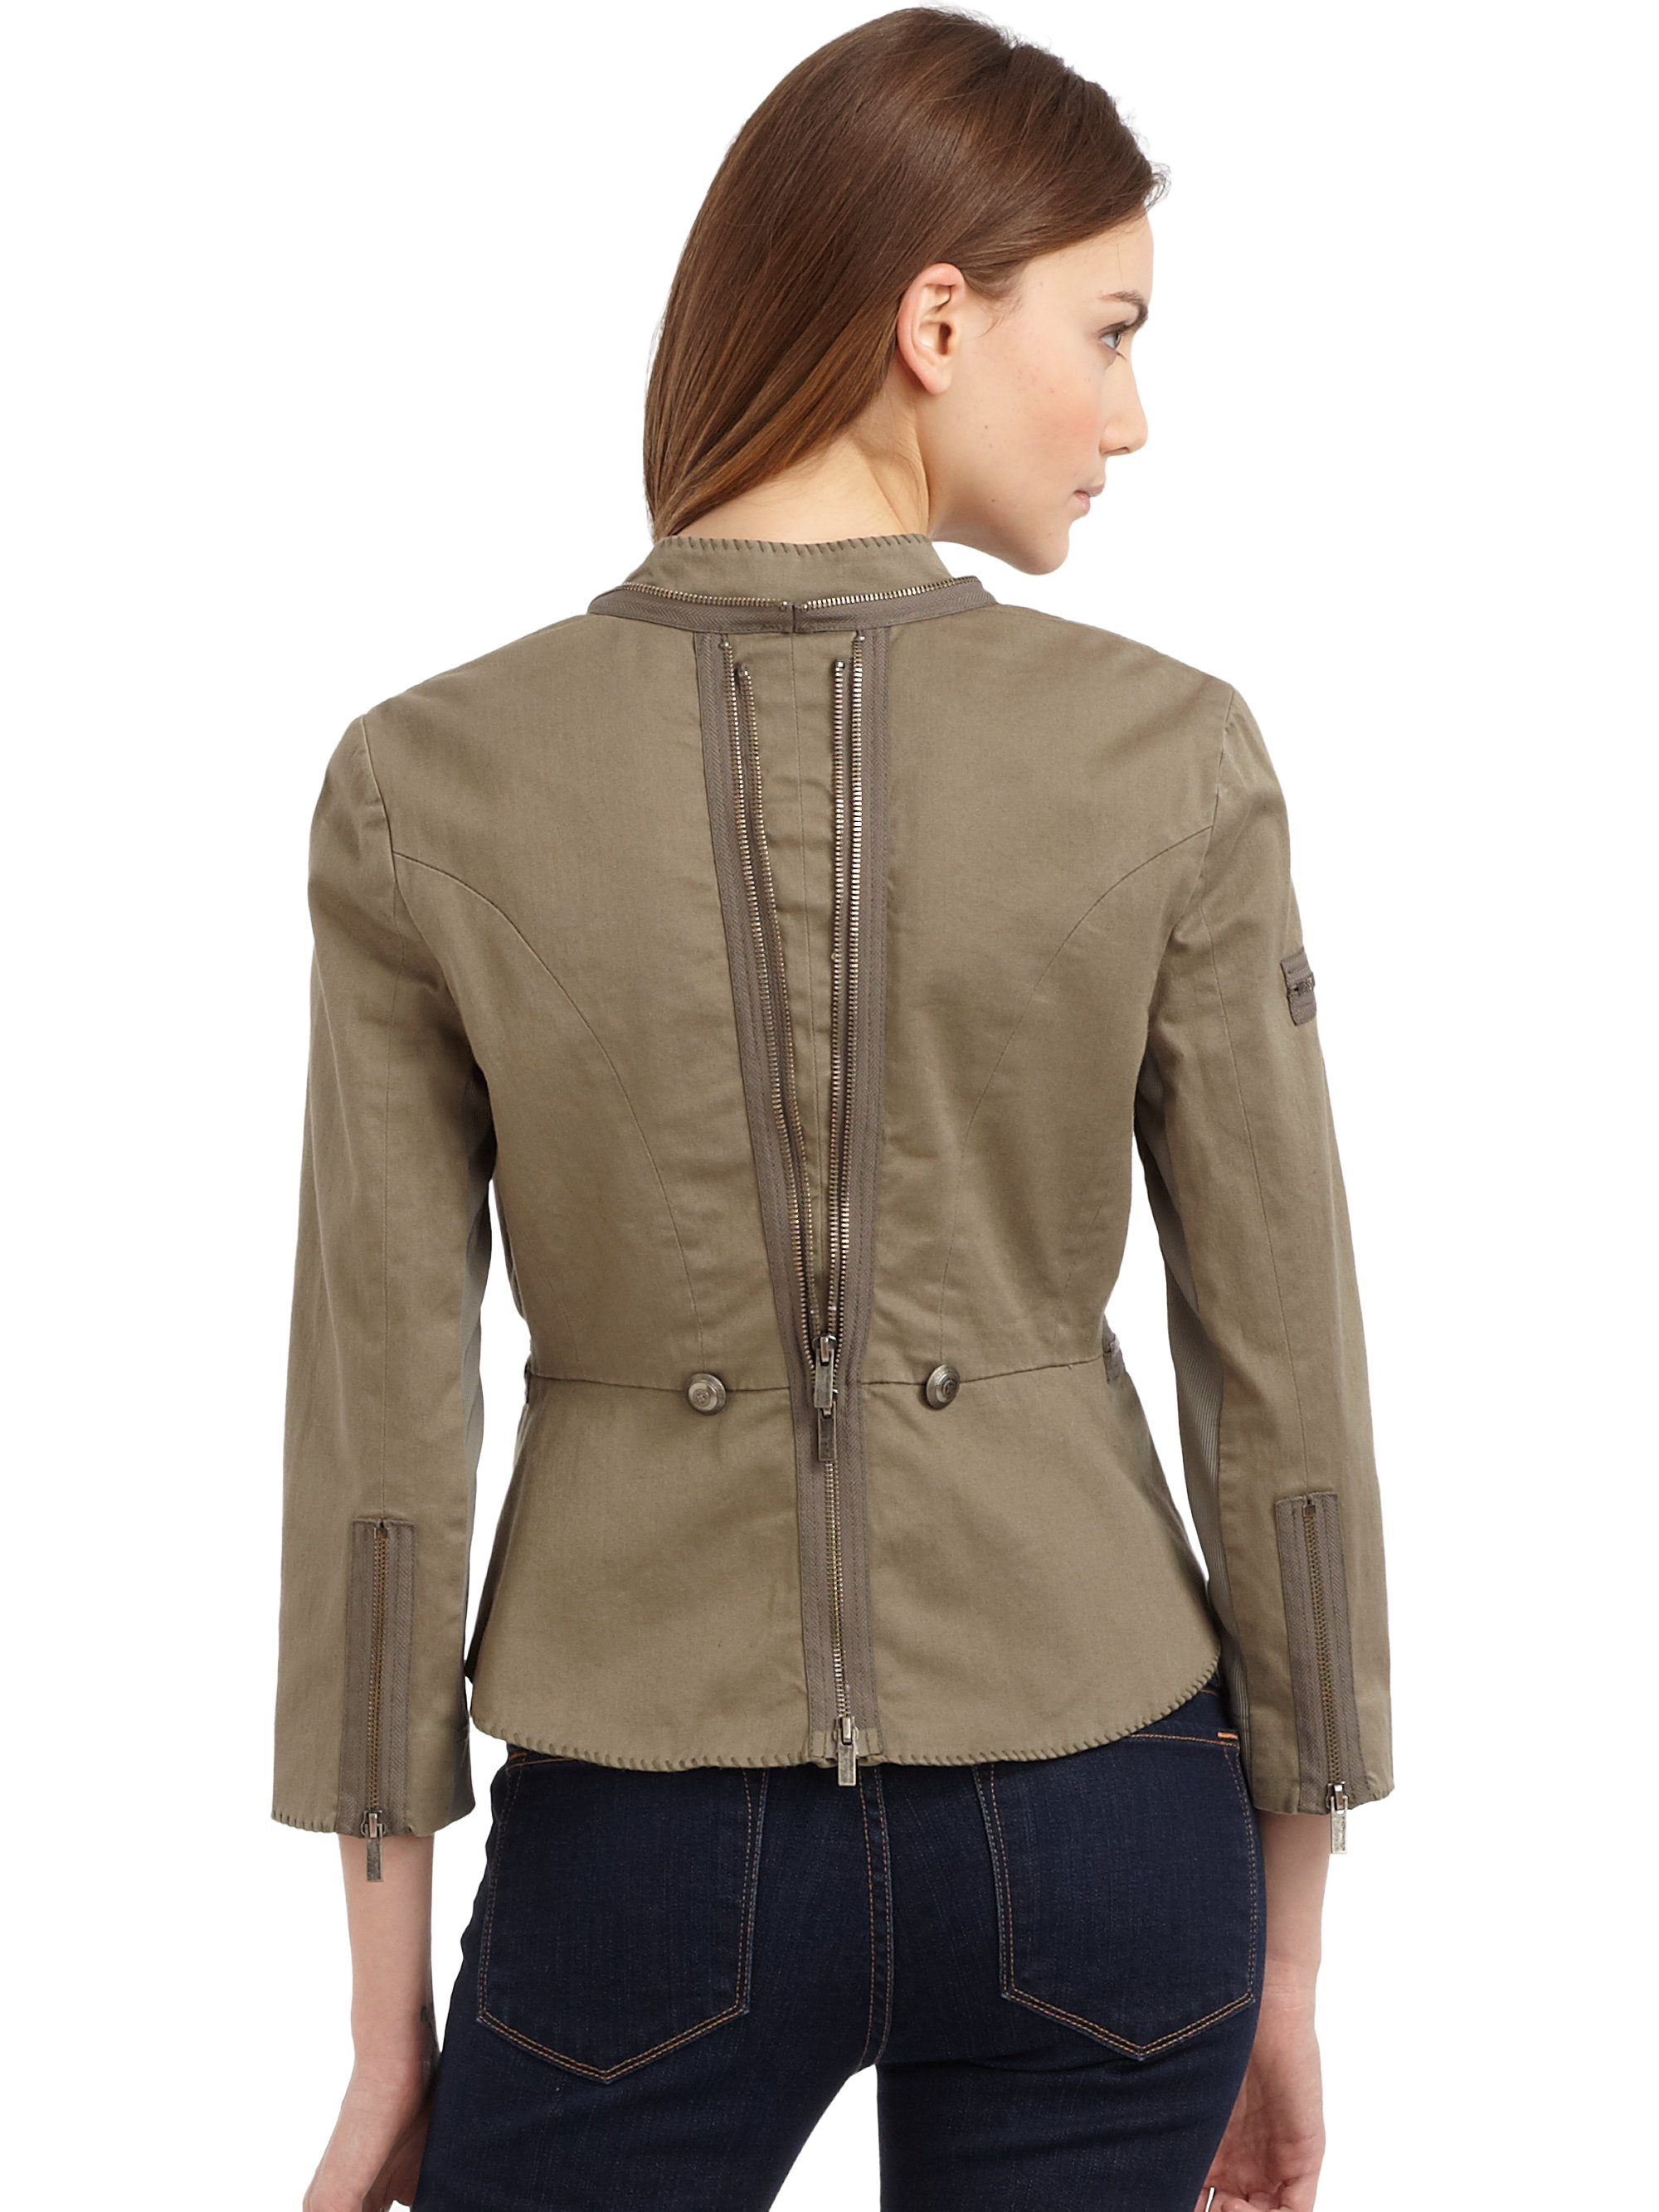 Lyst - Bcbgmaxazria Cropped Military Jacket in Brown